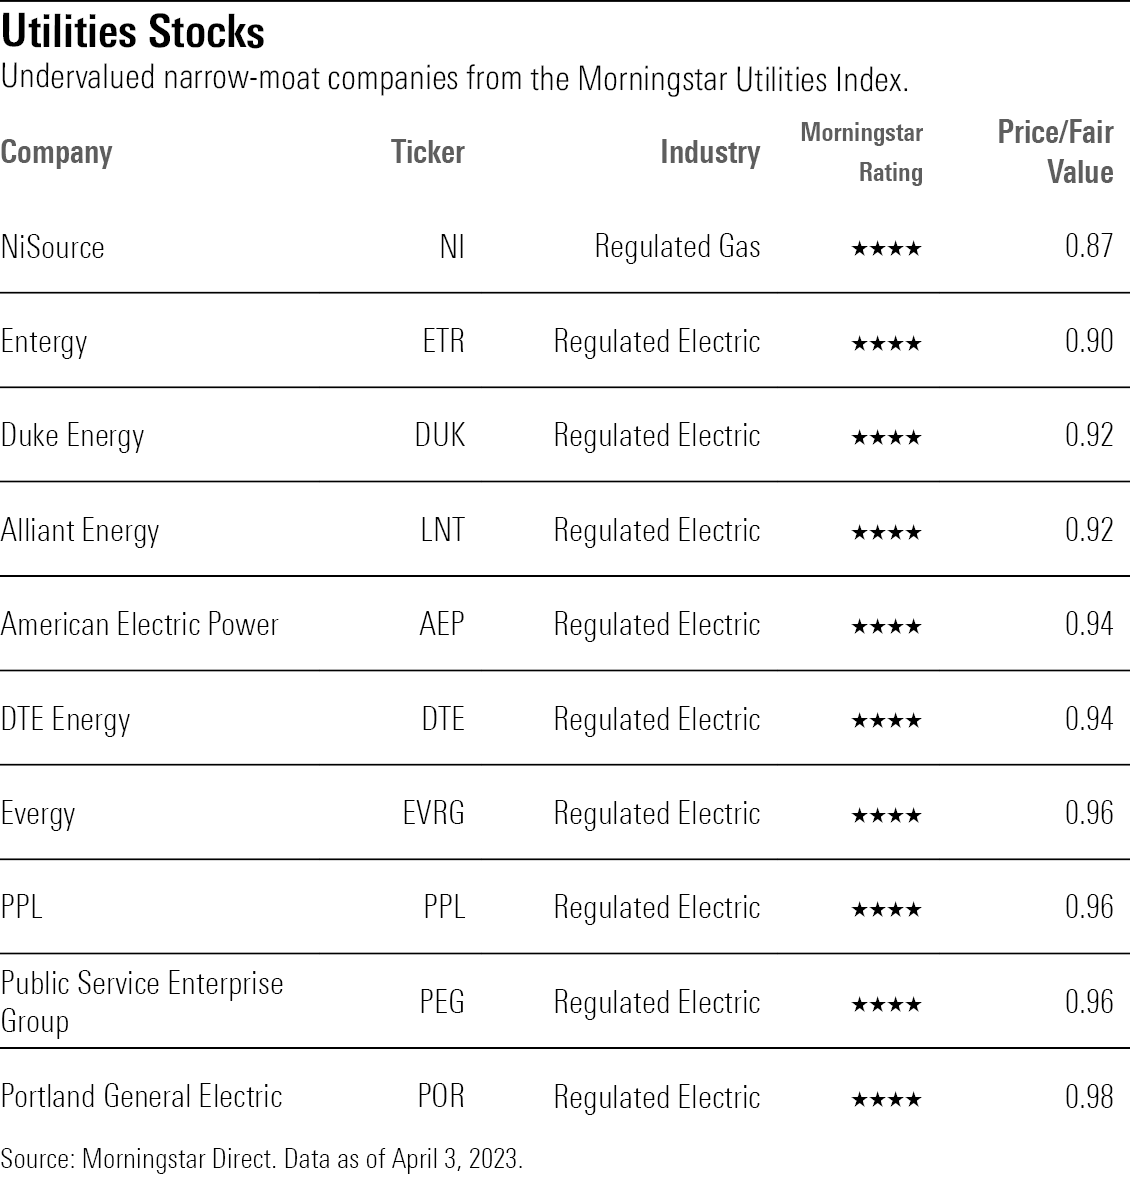 Chart of undervalued narrow-moat companies from the Morningstar Utilities Index.